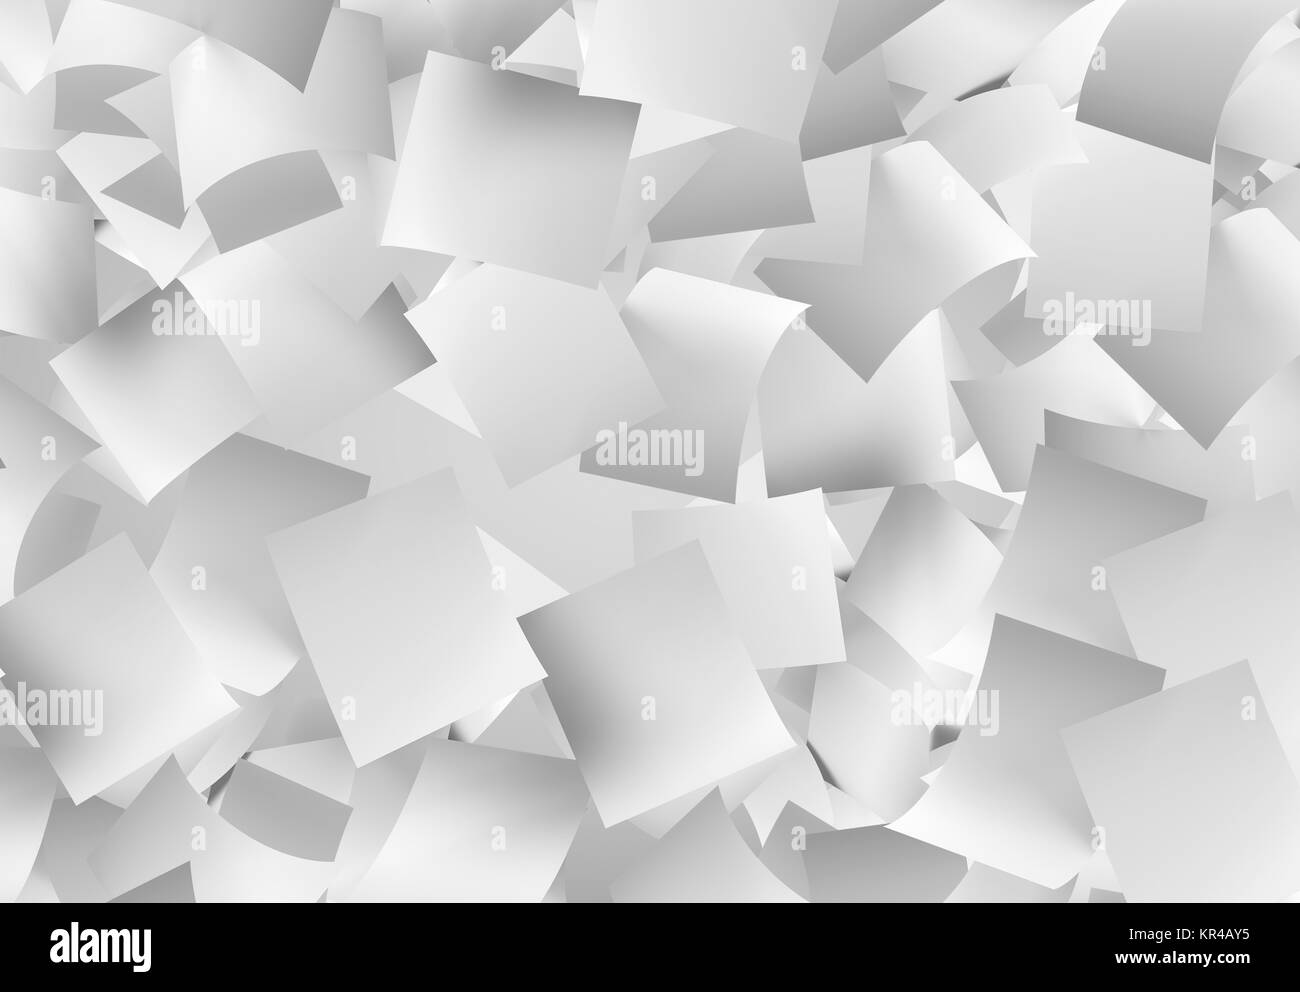 many white folded papers falling down Stock Photo